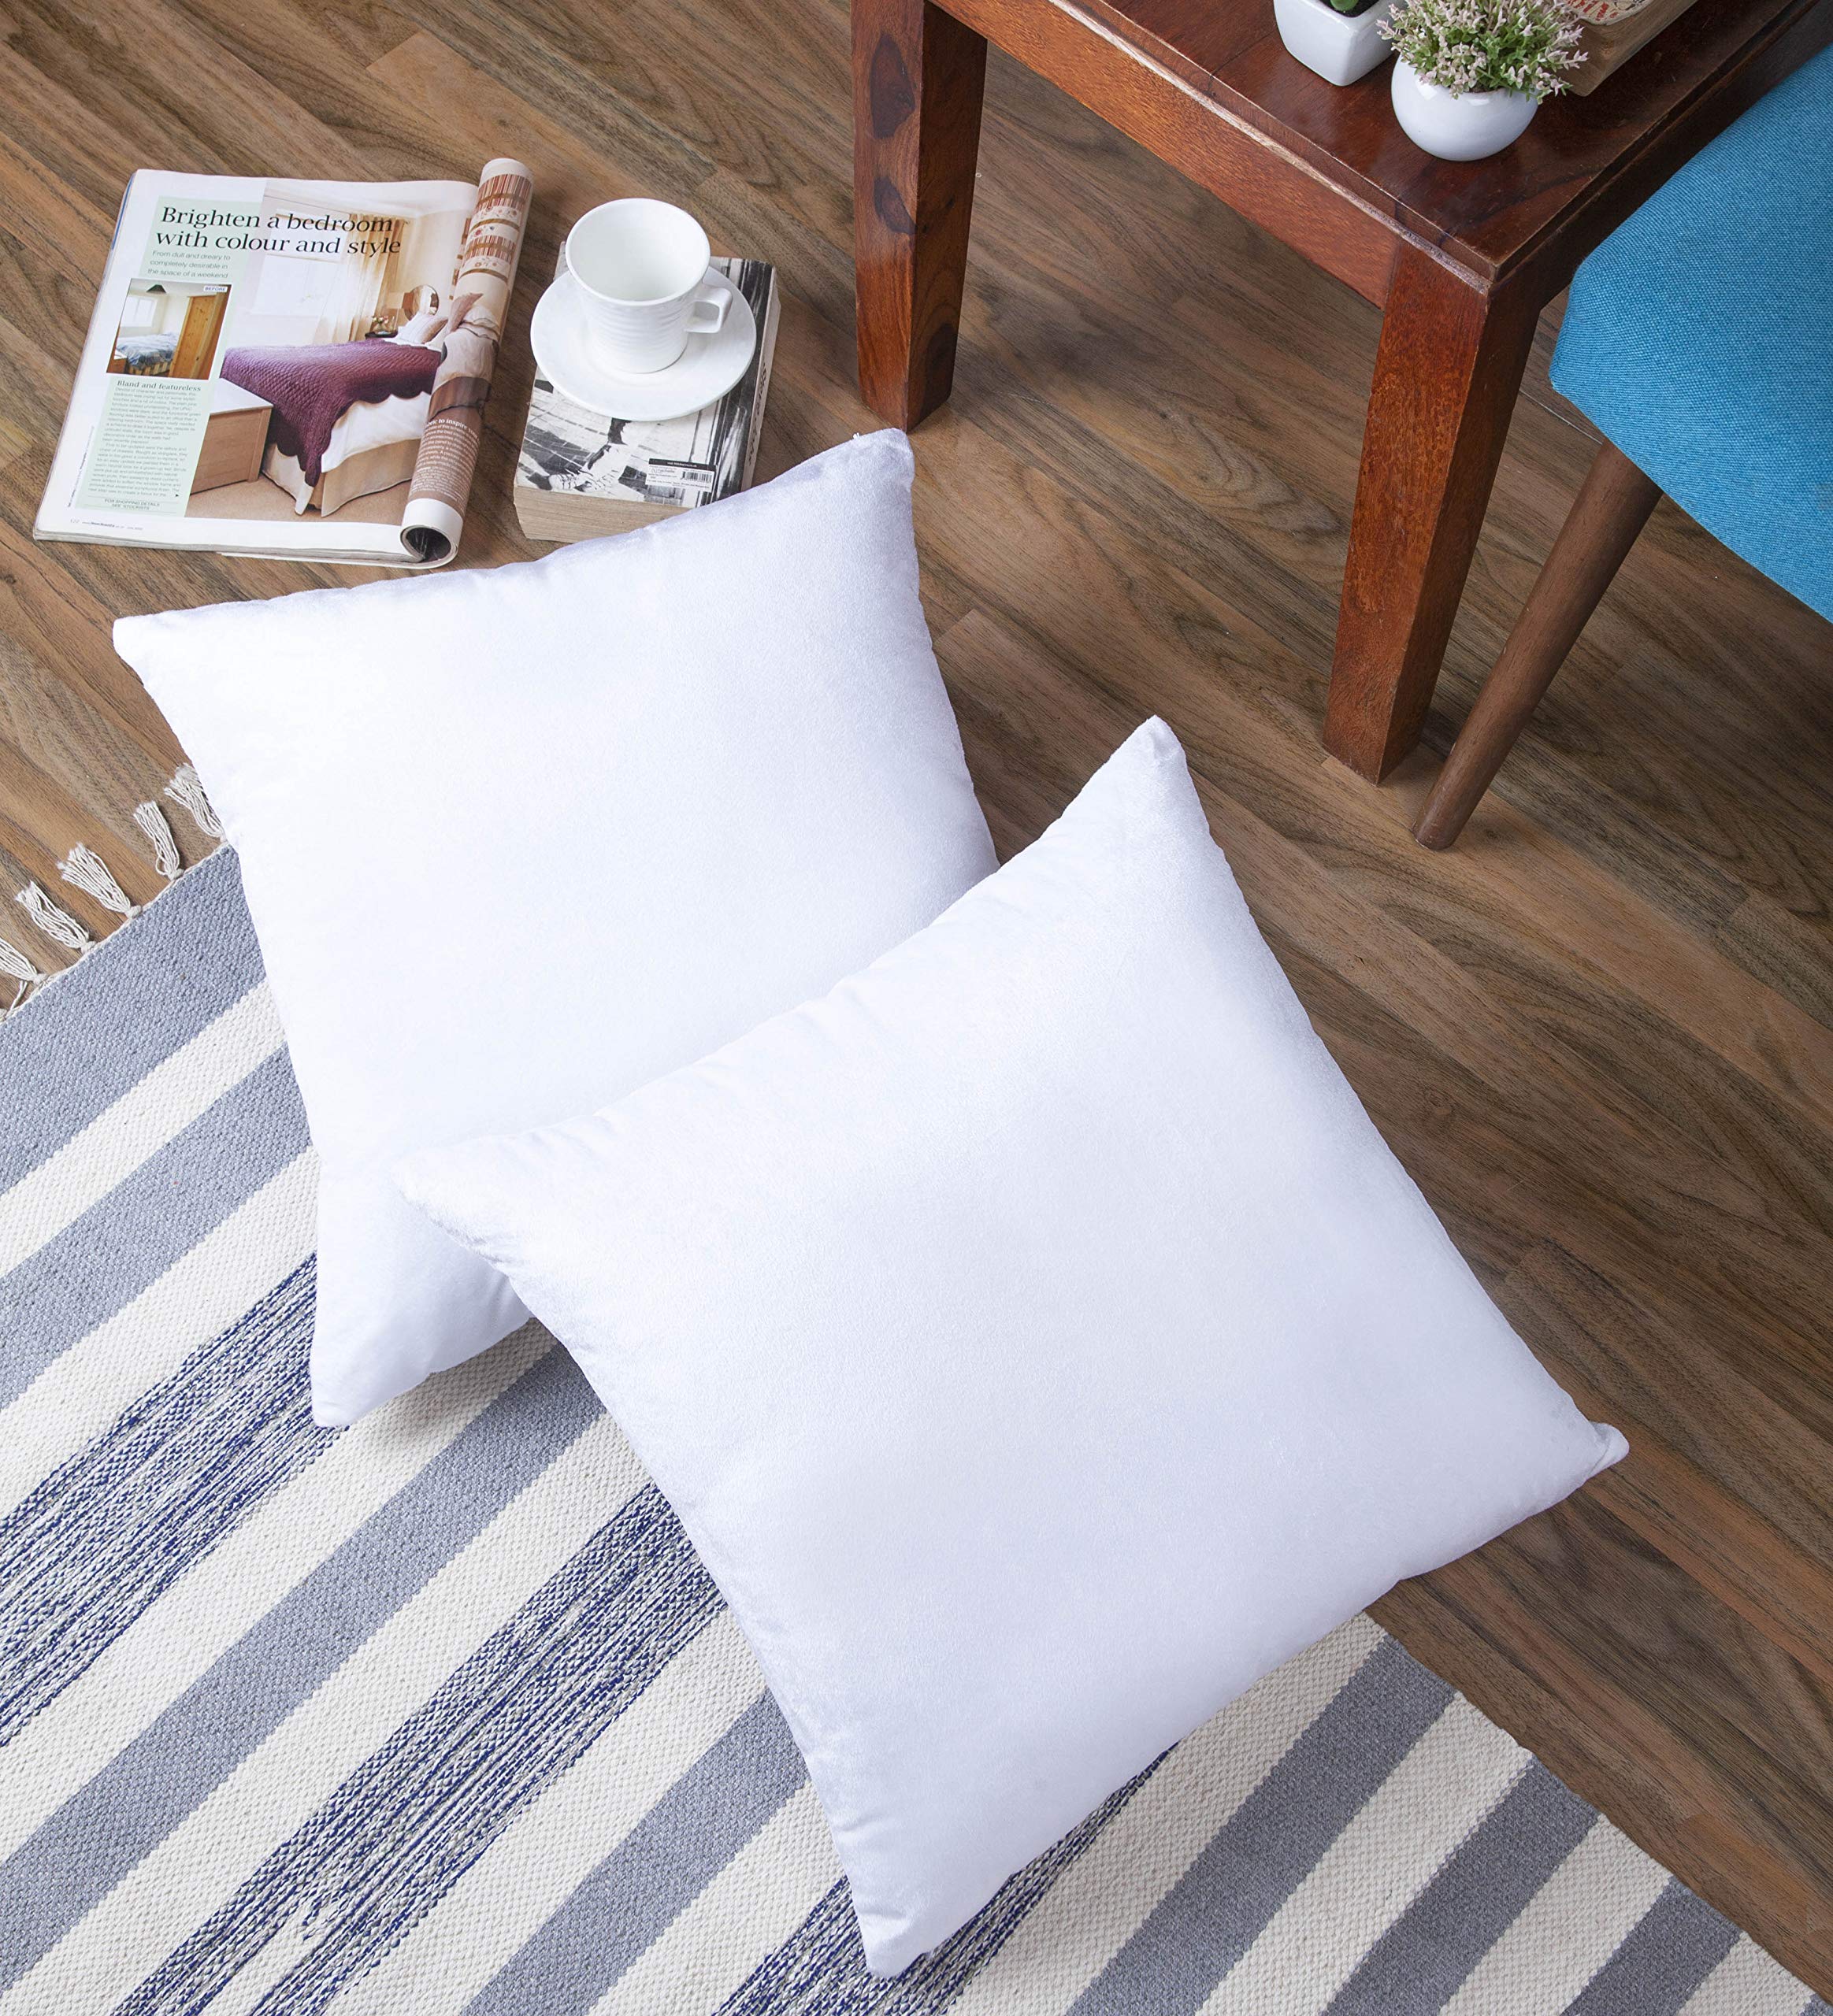 Encasa Homes Velvet Throw Pillow Cushion Covers 2 pc Set - White - 24"x24" / 60x60 cm Solid Plain Dyed Soft & Smooth, Square Accent Decorative Pillowcase for Couch, Sofa, Chair, Bed & Home